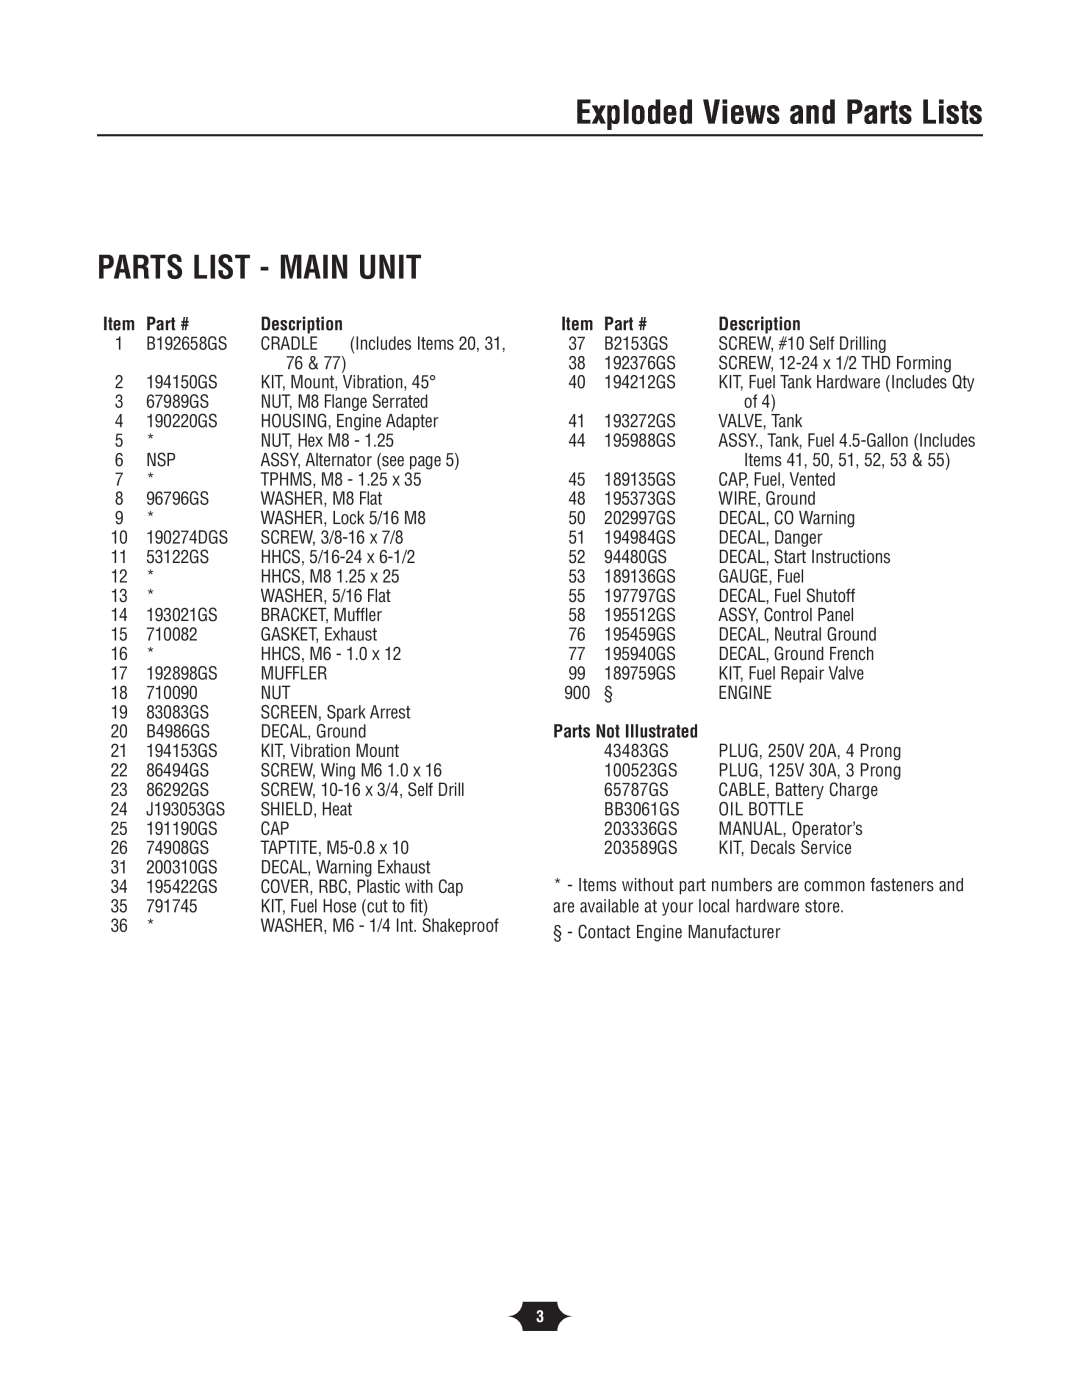 Briggs & Stratton 30342 manual Parts List - Main Unit, Description, Parts Not Illustrated, Exploded Views and Parts Lists 